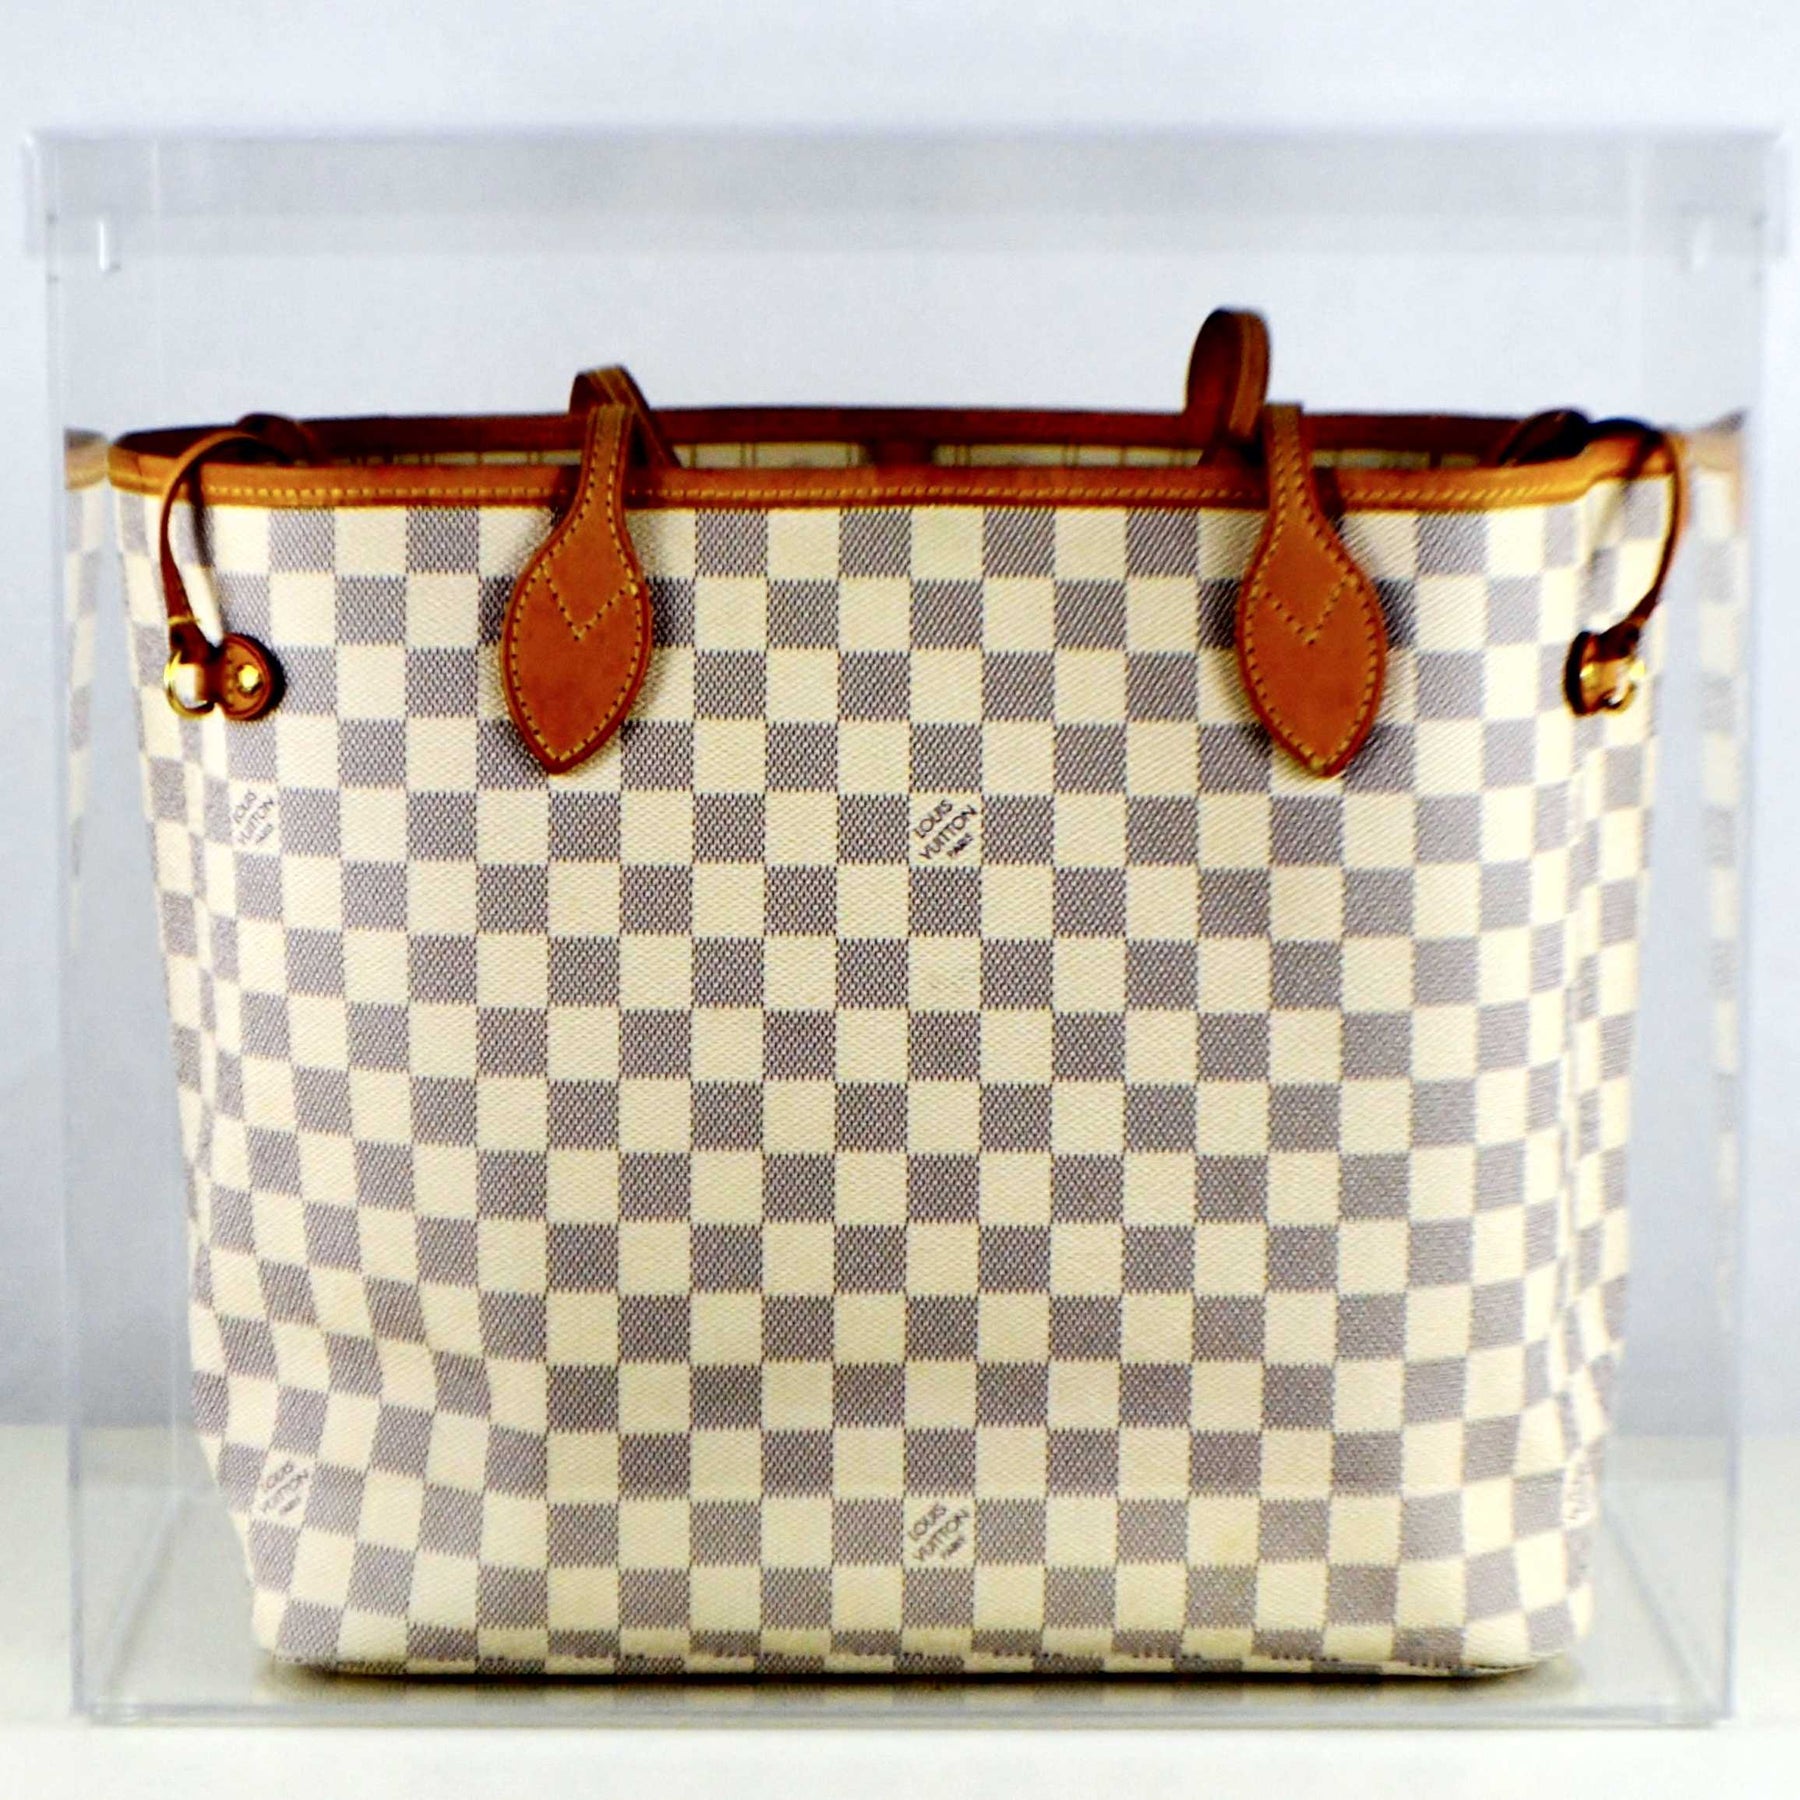 Louis Vuitton, Bags, New Hardly Used Lv Neverfull Damier Gm With Pouch  Box Dustbag Organizer